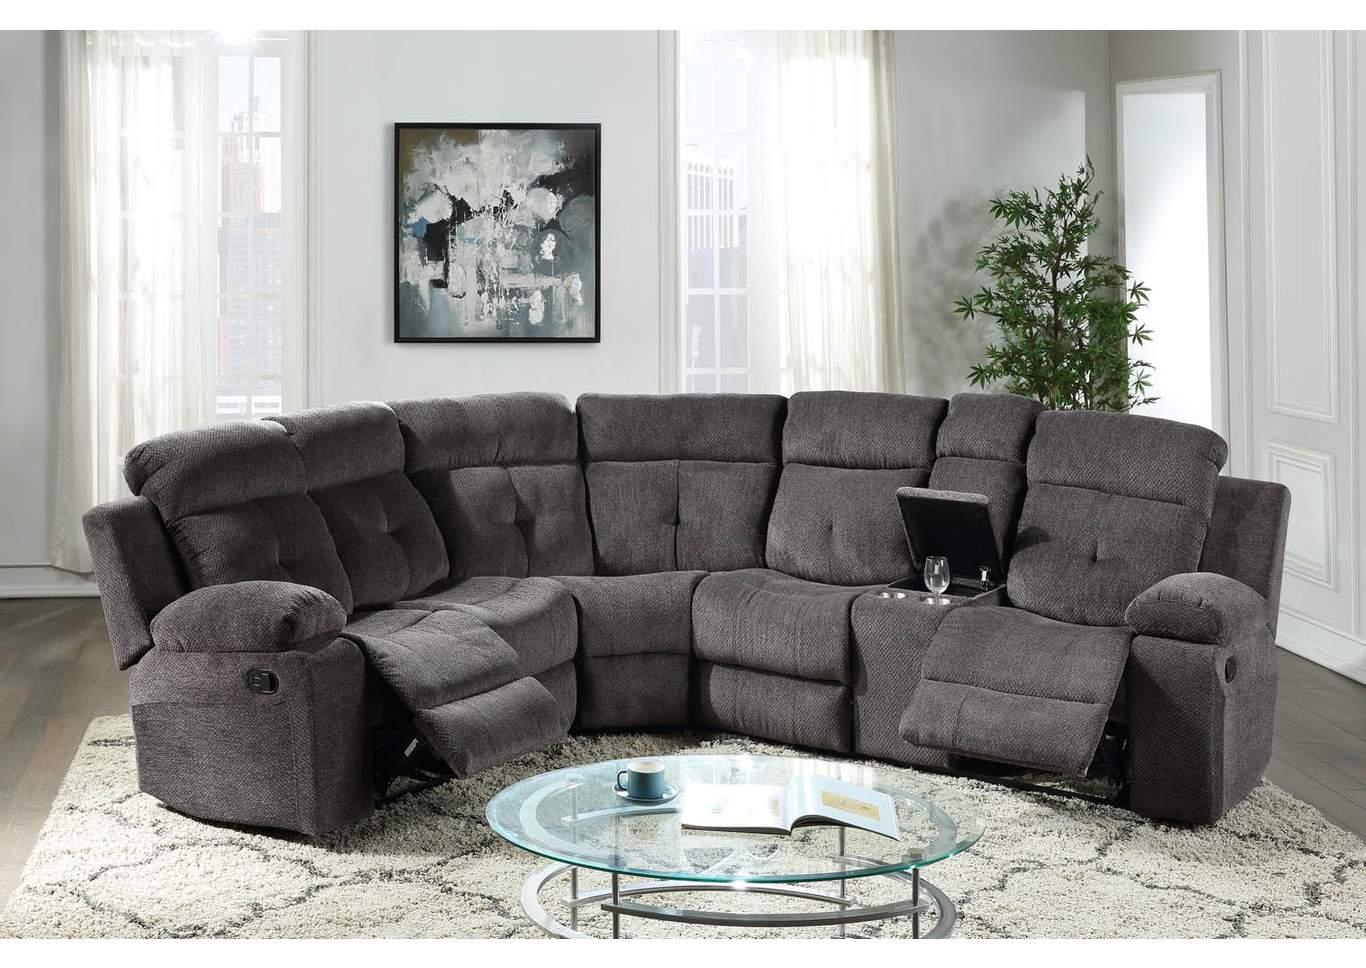 Contemporary, Modern Sectional Recliner ARIZONA GHF-808857682642 in Gray Fabric